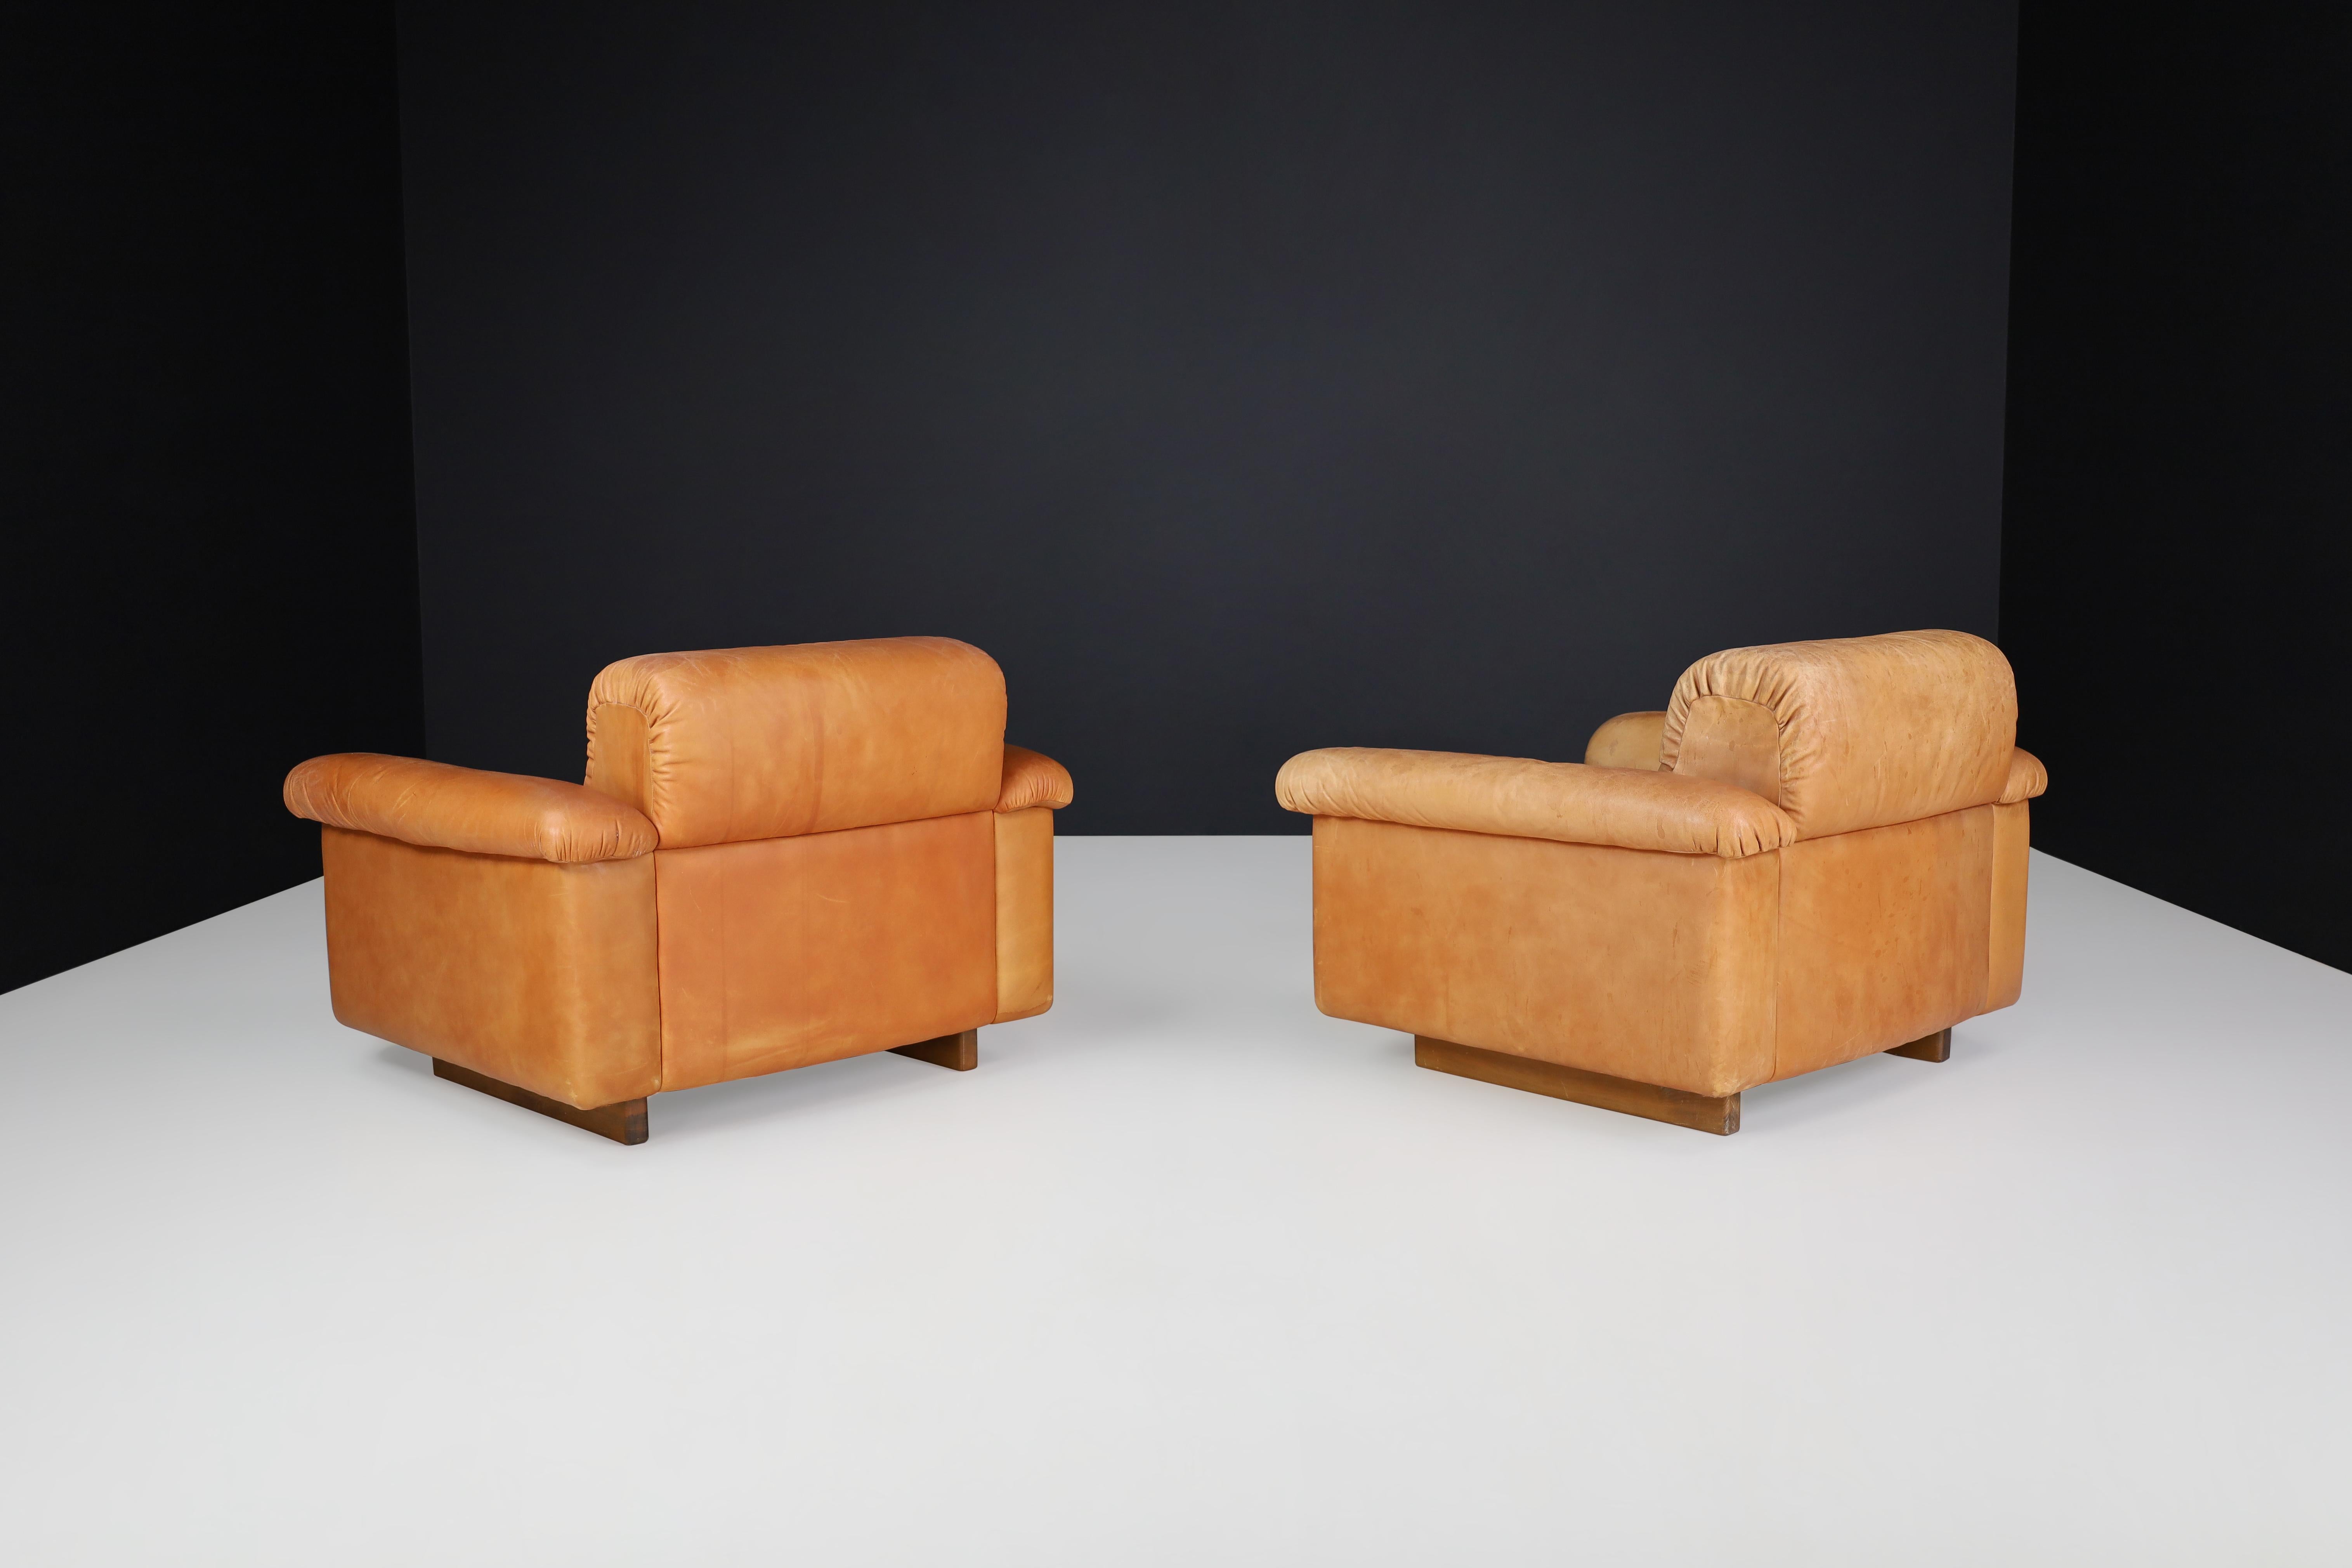 De Sede DS 45 Lounge Chairs in Patinated Leather, Switzerland, 1970s For Sale 1